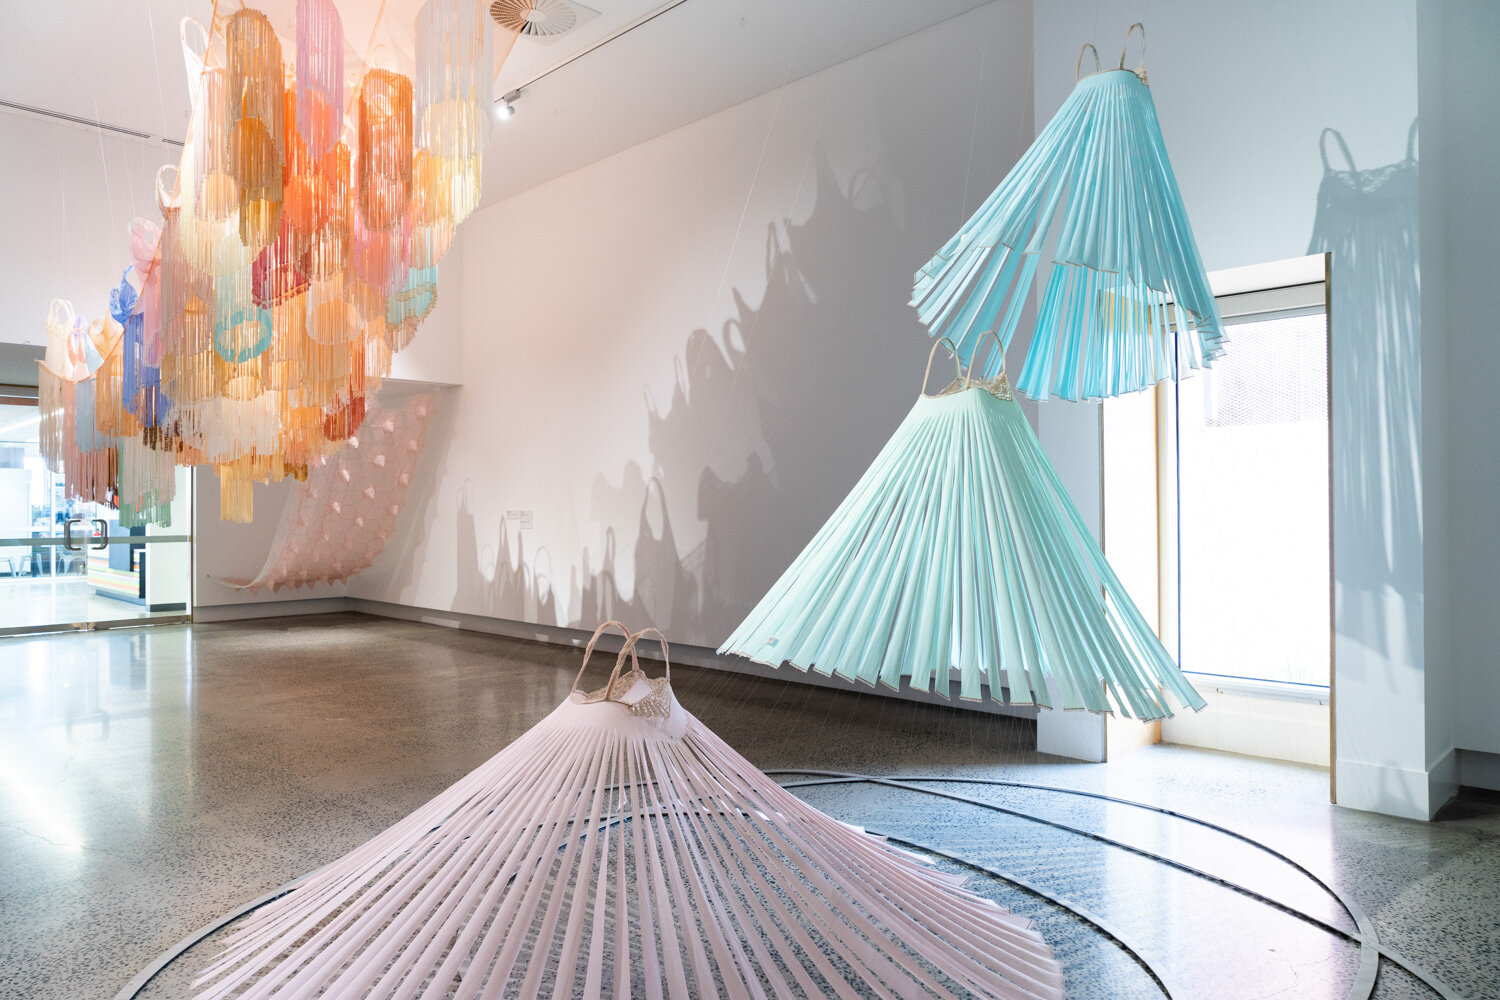  Left:  The Sleepover,  2018-19, found nighties and slips, found synthetic fabric and cotton ribbon, milliner’s wire, thread (with assistance from Melanie Ward, Monika Holgar and Kate Woodcroft) 670cm x 280cm x 210cm. Right:  Ascension I (Angels),  2